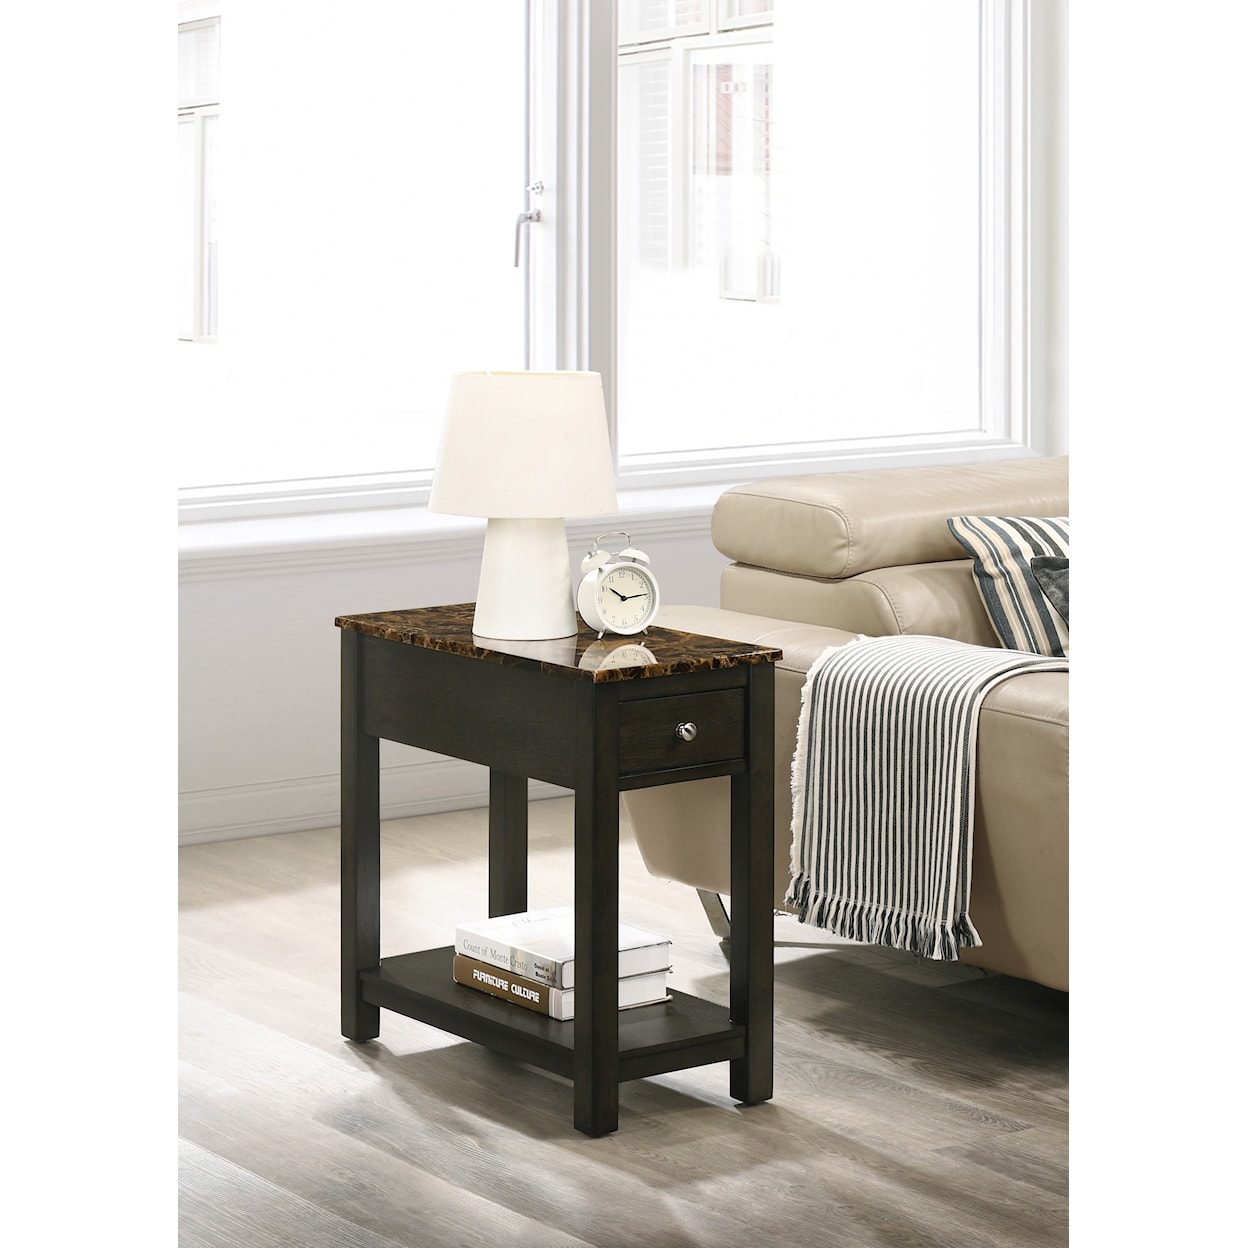 New Classic Noah End Table